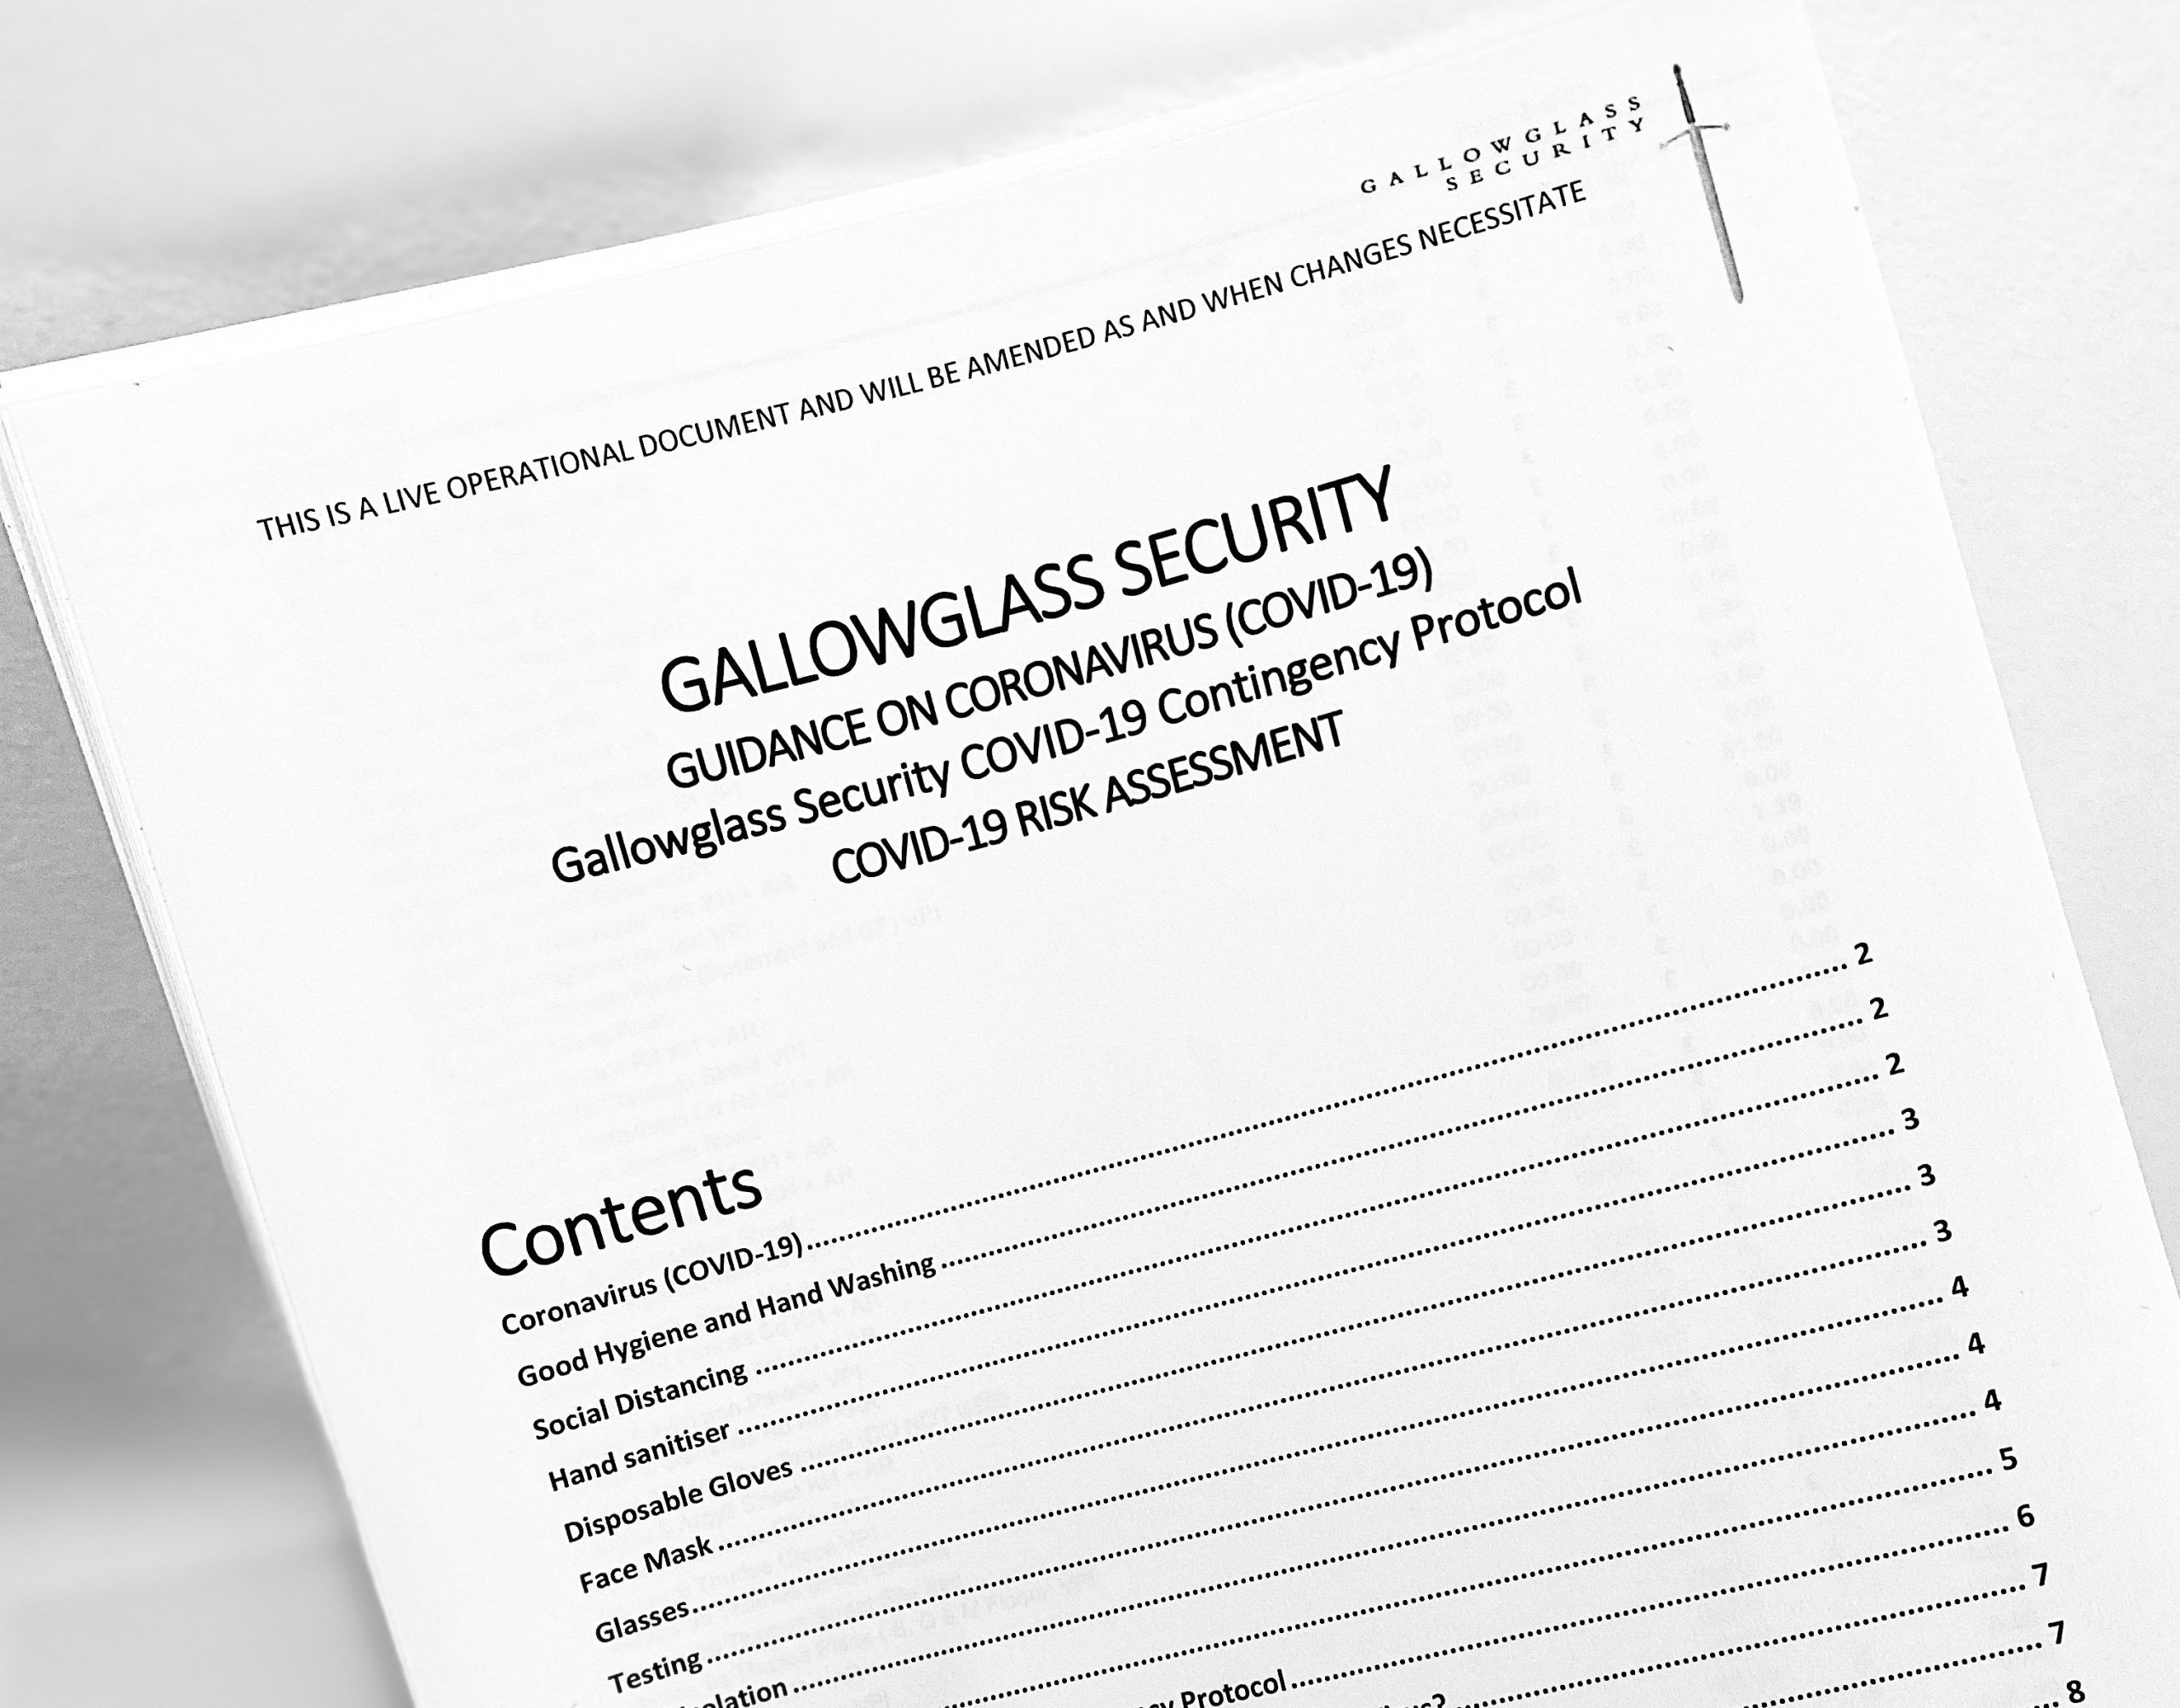 Gallowglass Security Health and Safety advice for COVID 19